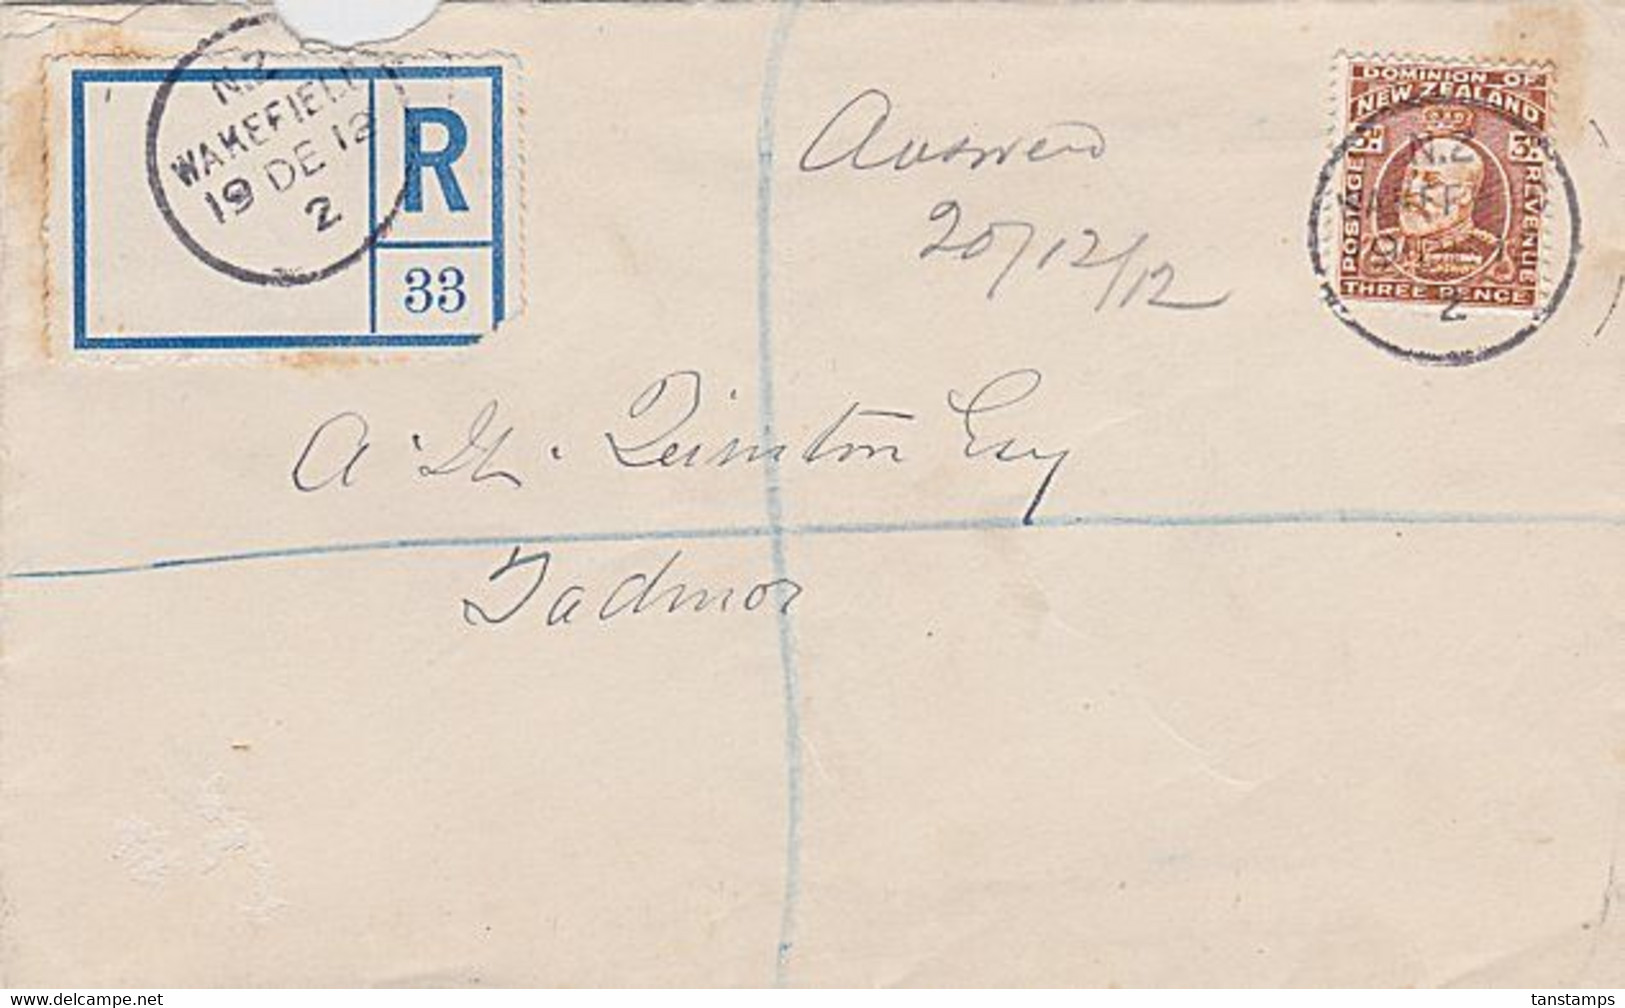 NEW ZEALAND 1912 REGISTERED COVER 3d KEVII SOLO FRANKING WAKEFIELD A-CLASS CDS - Covers & Documents